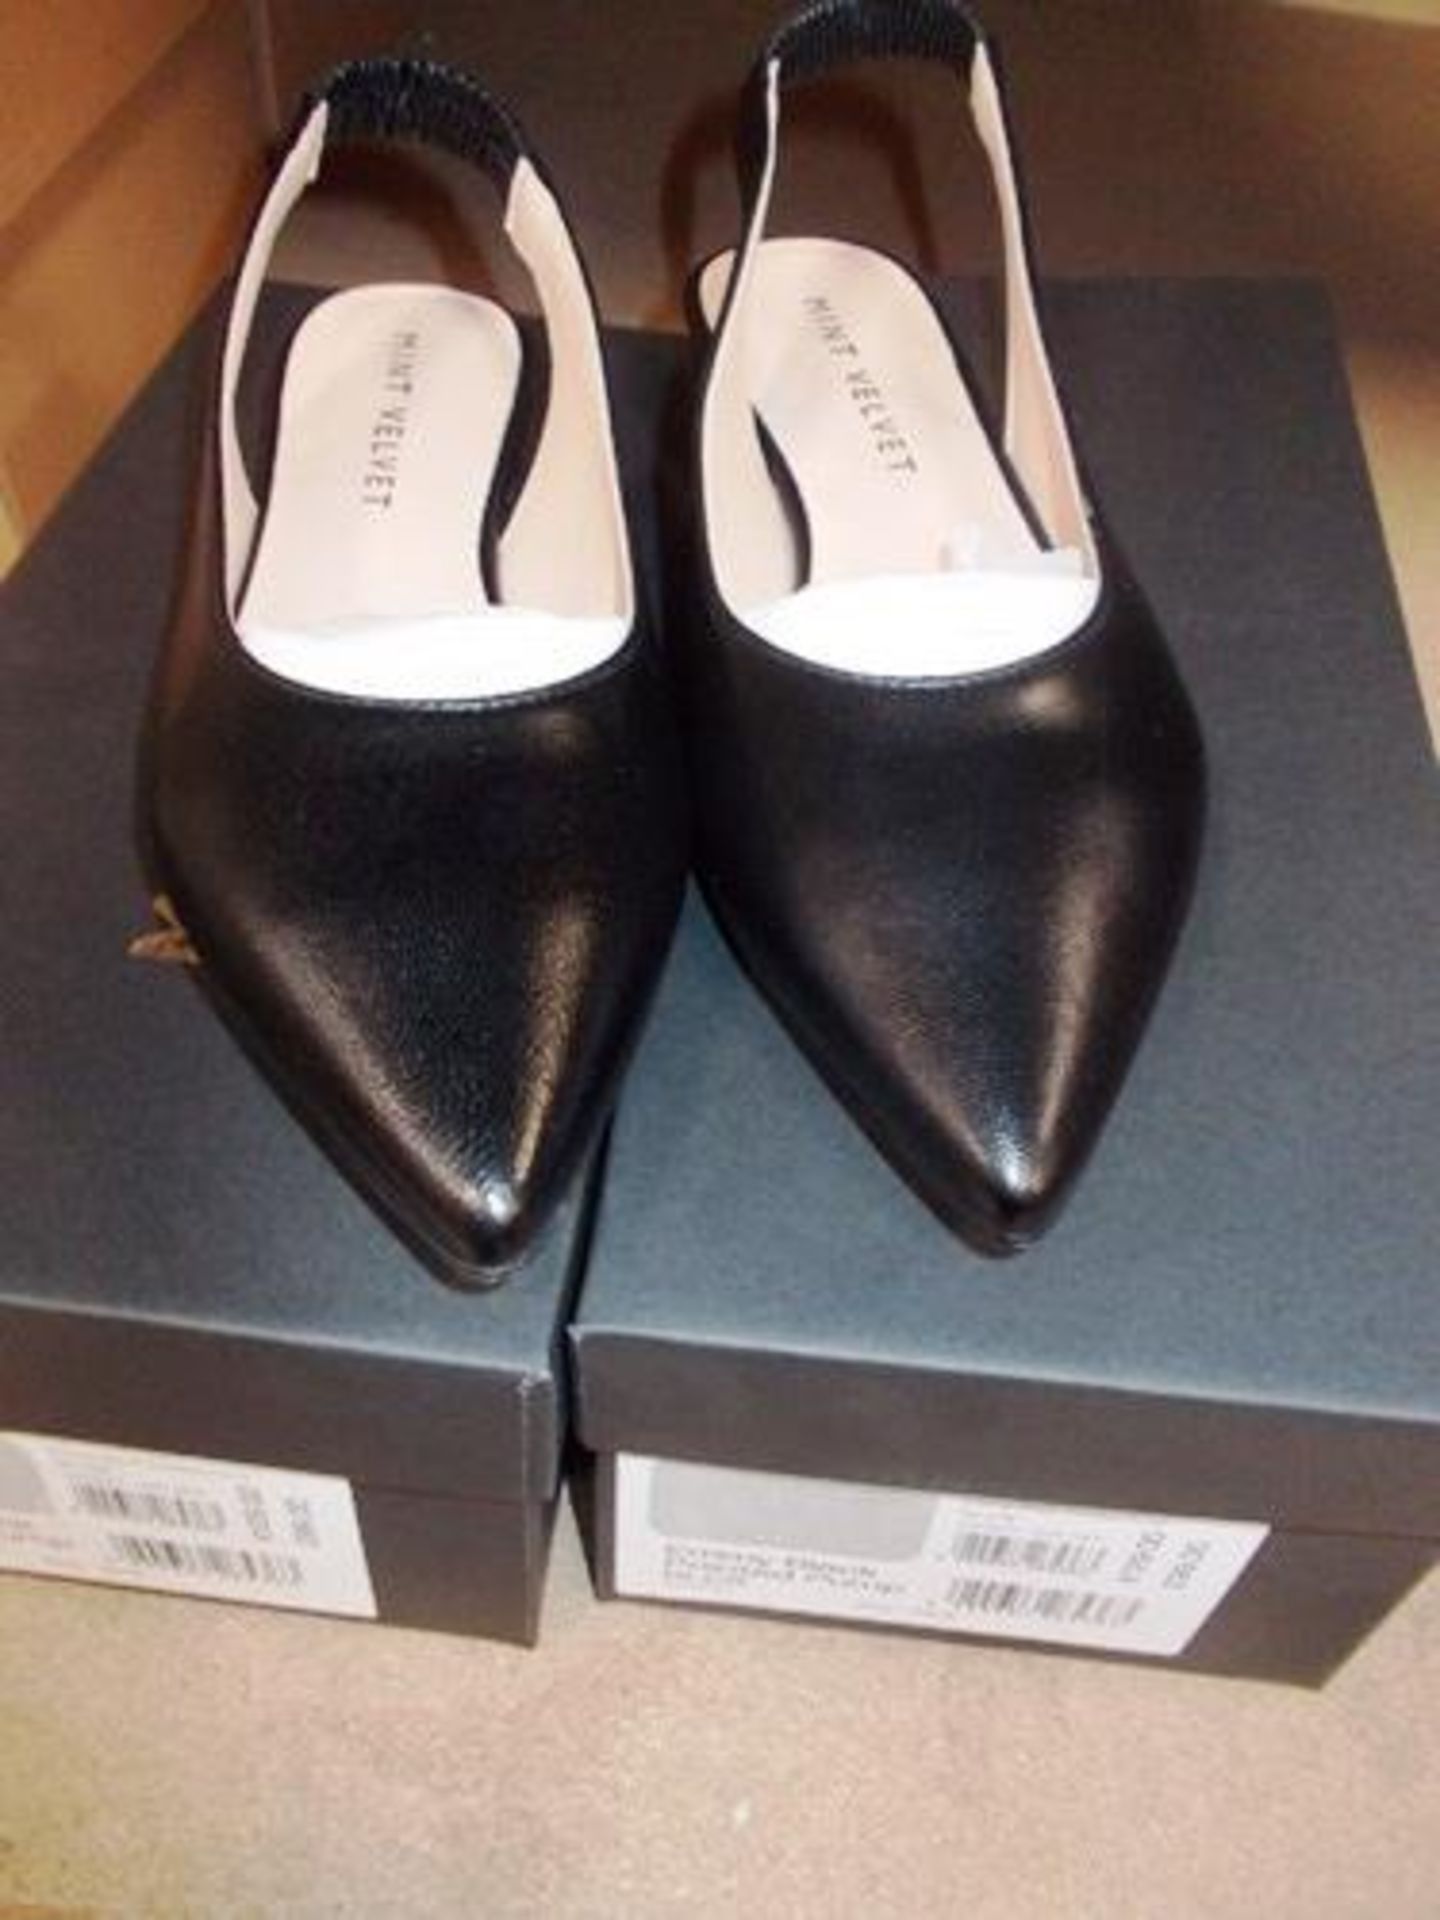 2 x pairs of Mint Velvet Emmy black pointed pumps, size 6, RRP £99.00 each - New in box (E1B)